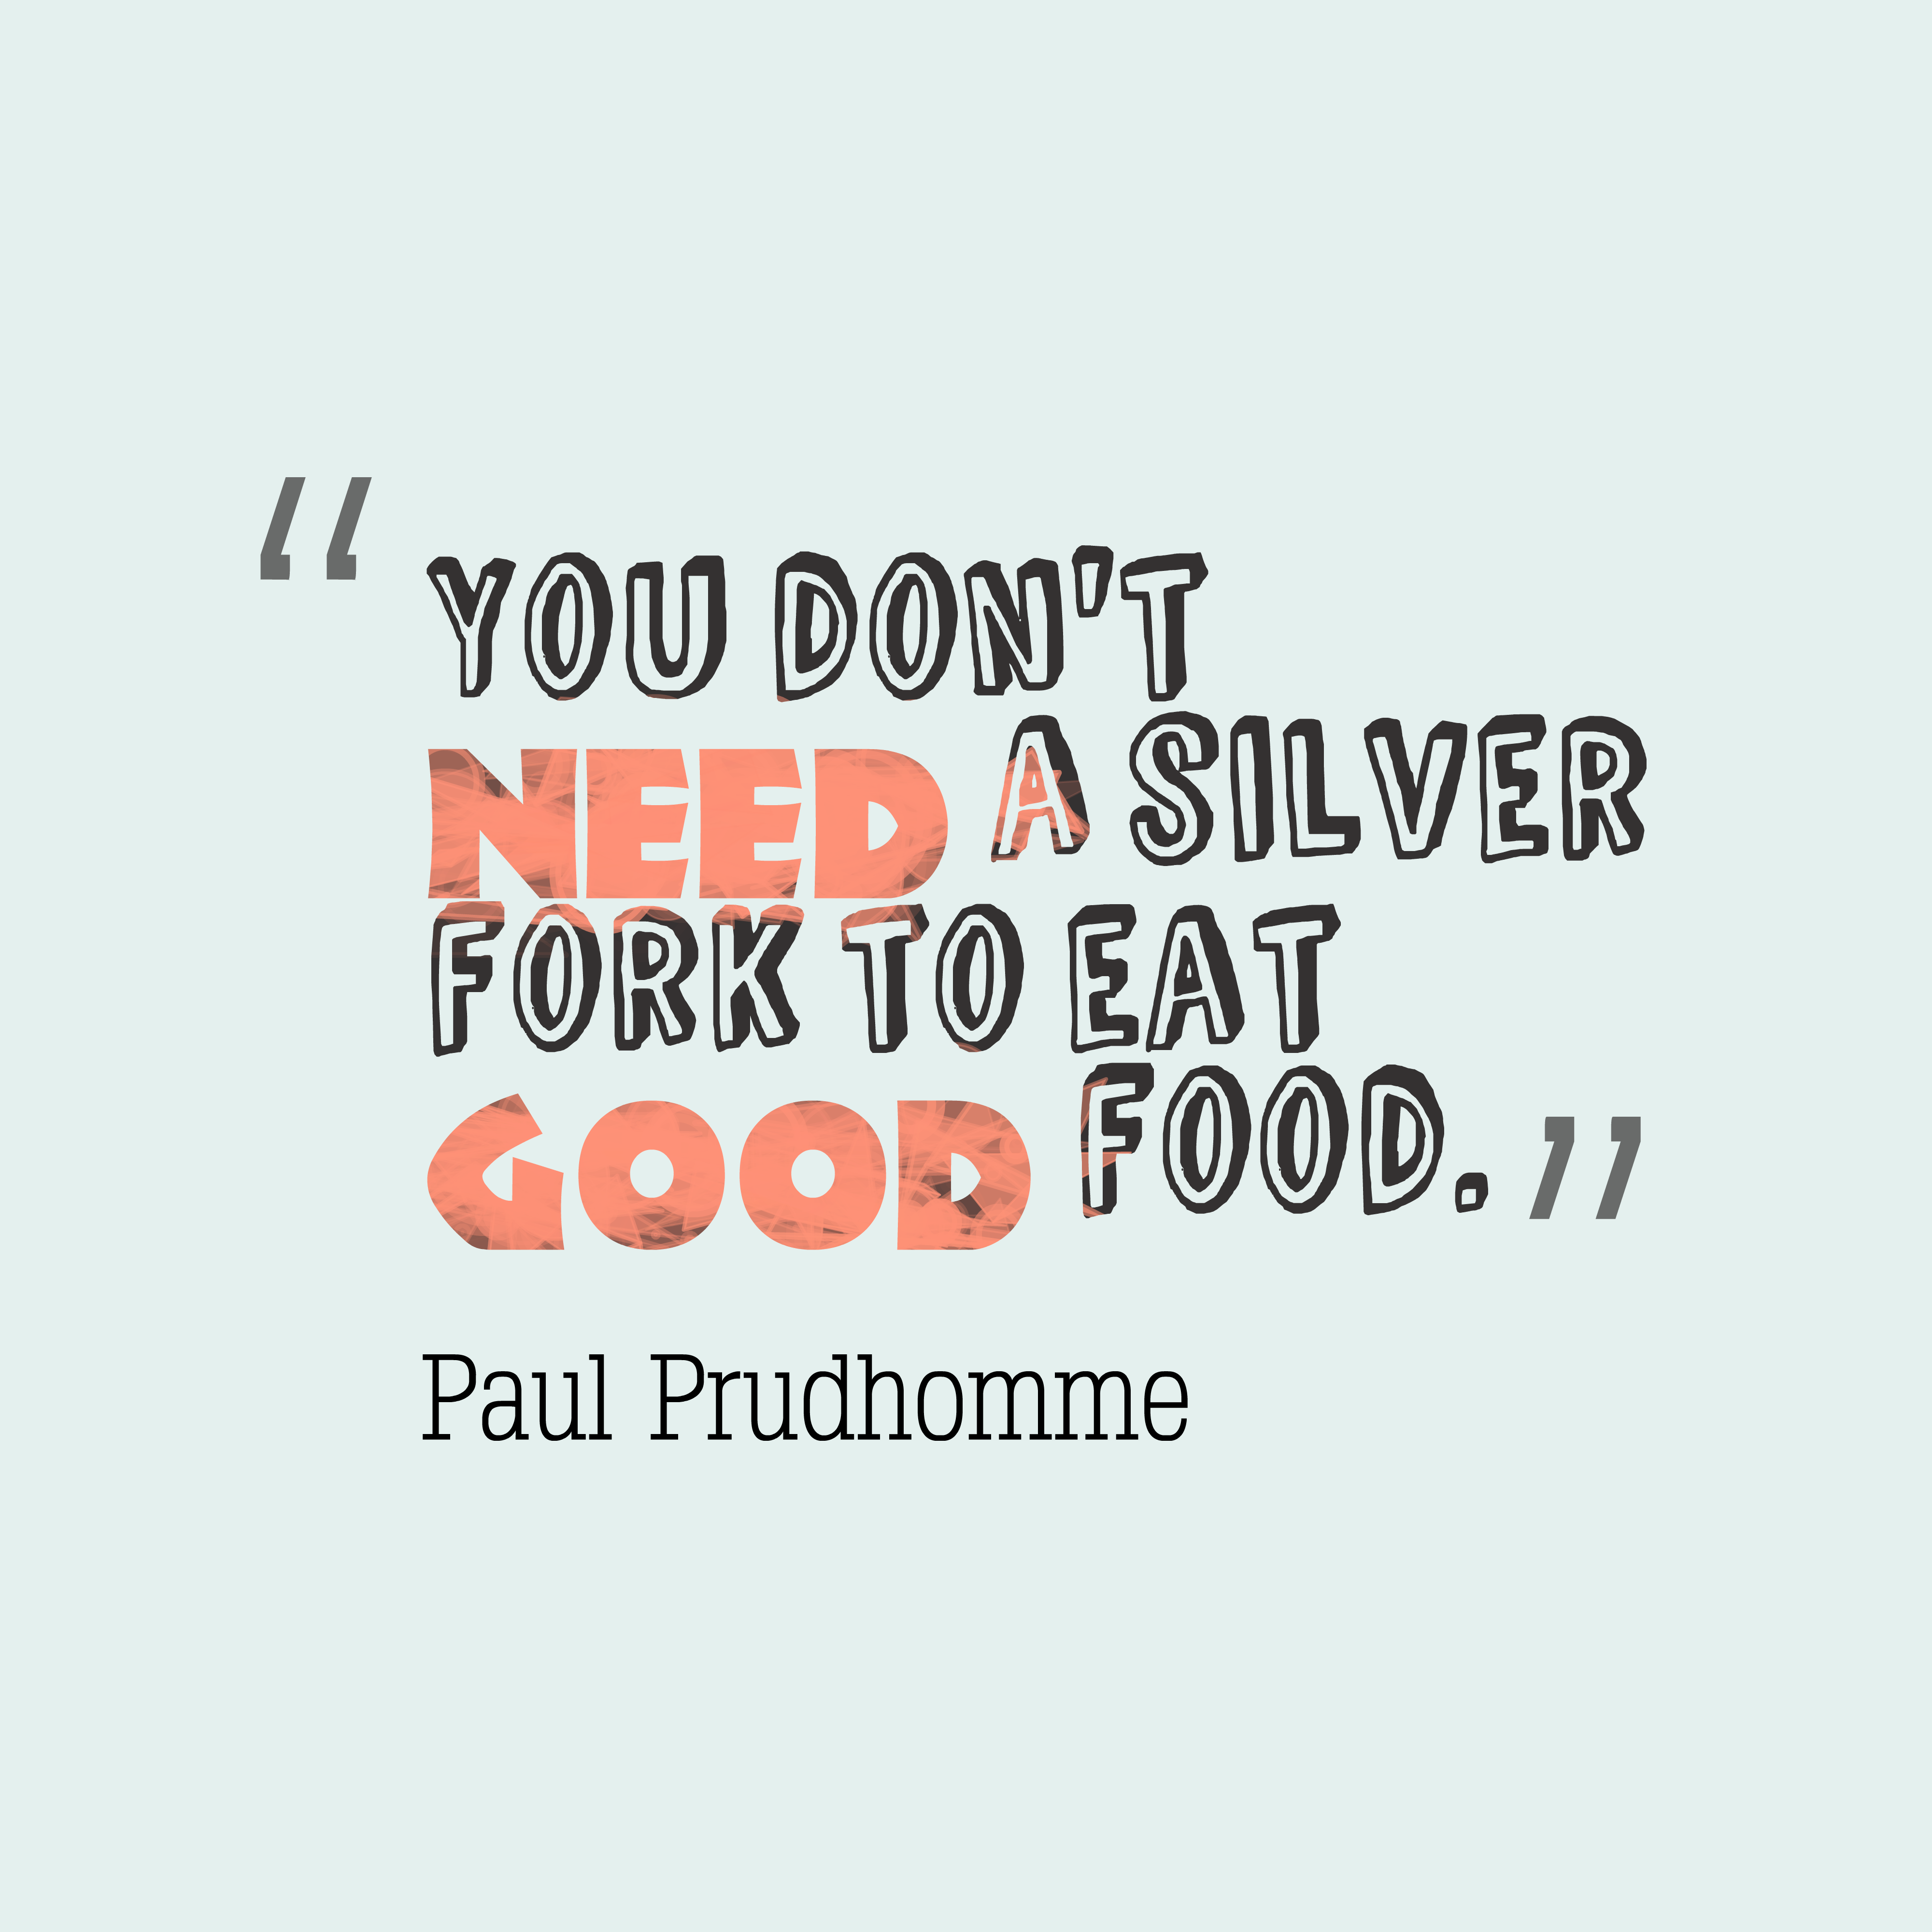 You don't need a silver fork to eat good food. Paul Prudhomme